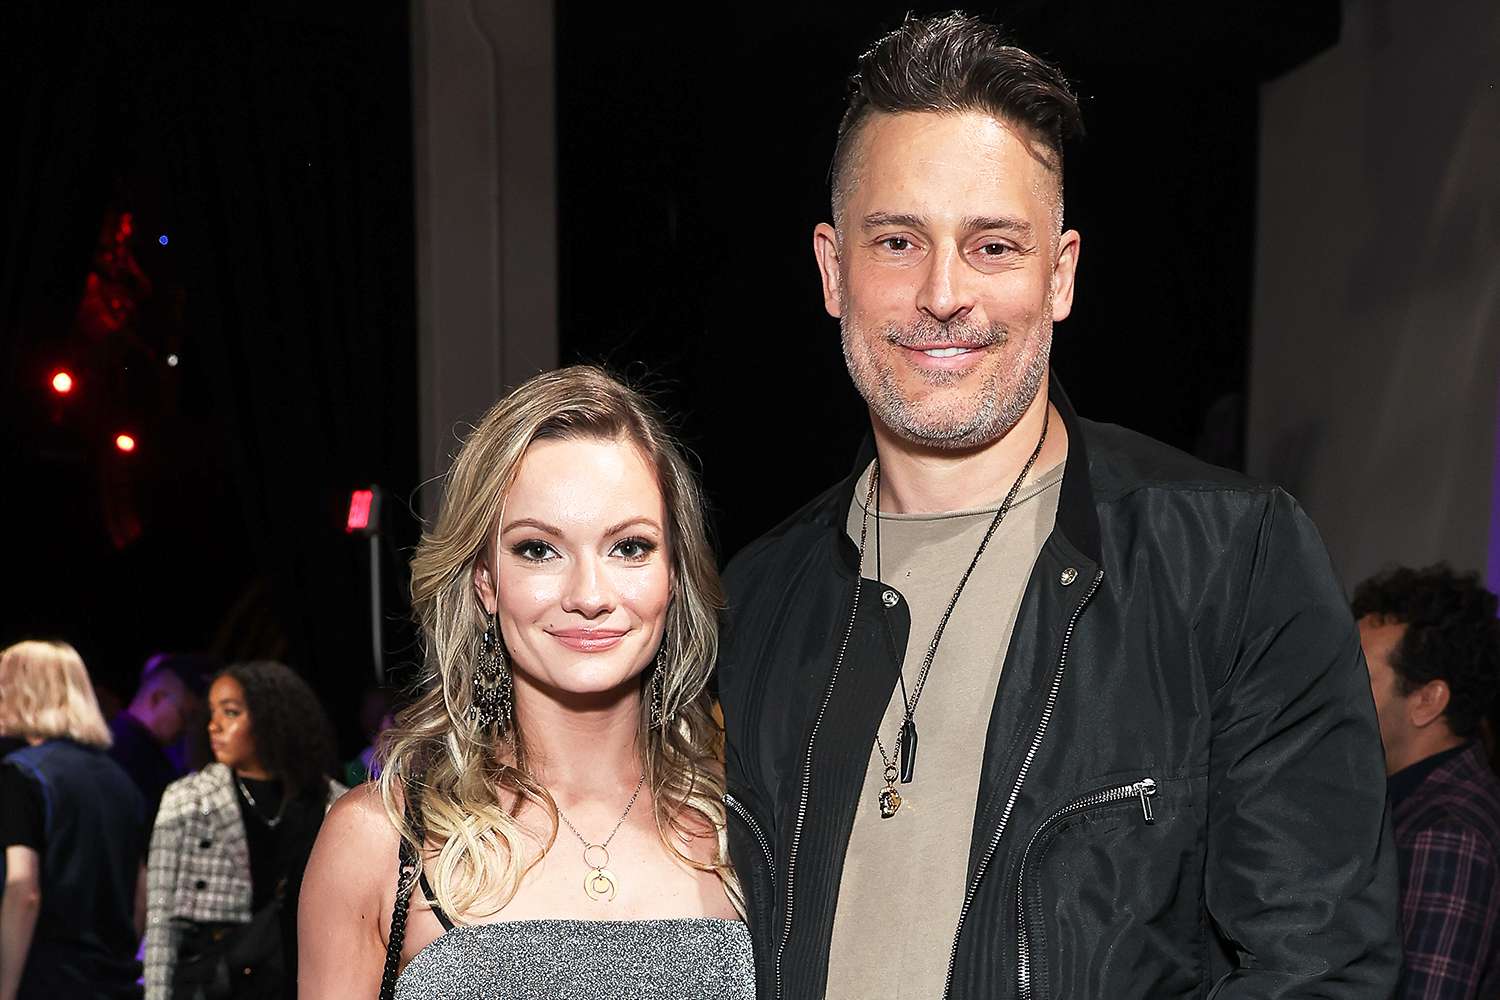 Joe Manganiello and Caitlin O'Connor Spend 'All of Their Time Together,' Enjoyed Romantic 'World Tour': Exclusive Source